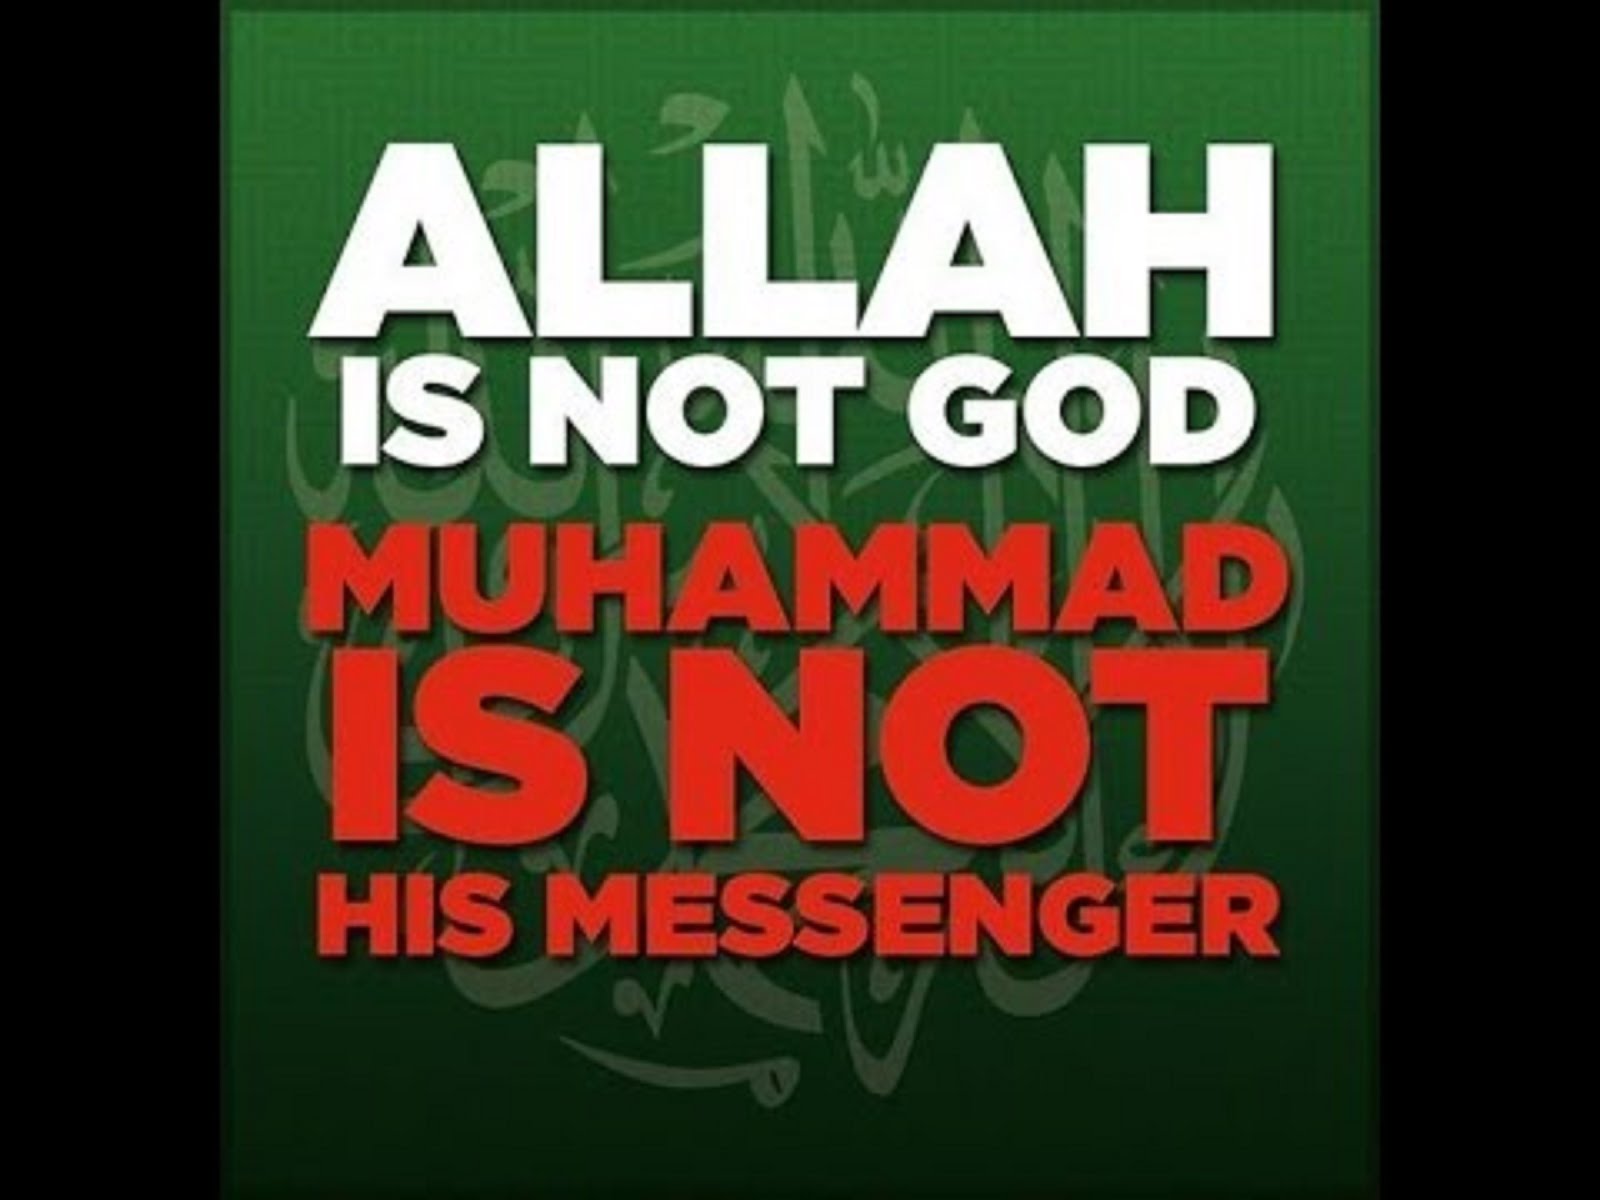 ALLAH IS NOT GOD MUHAMMAD IS NOT HIS MESSENGER